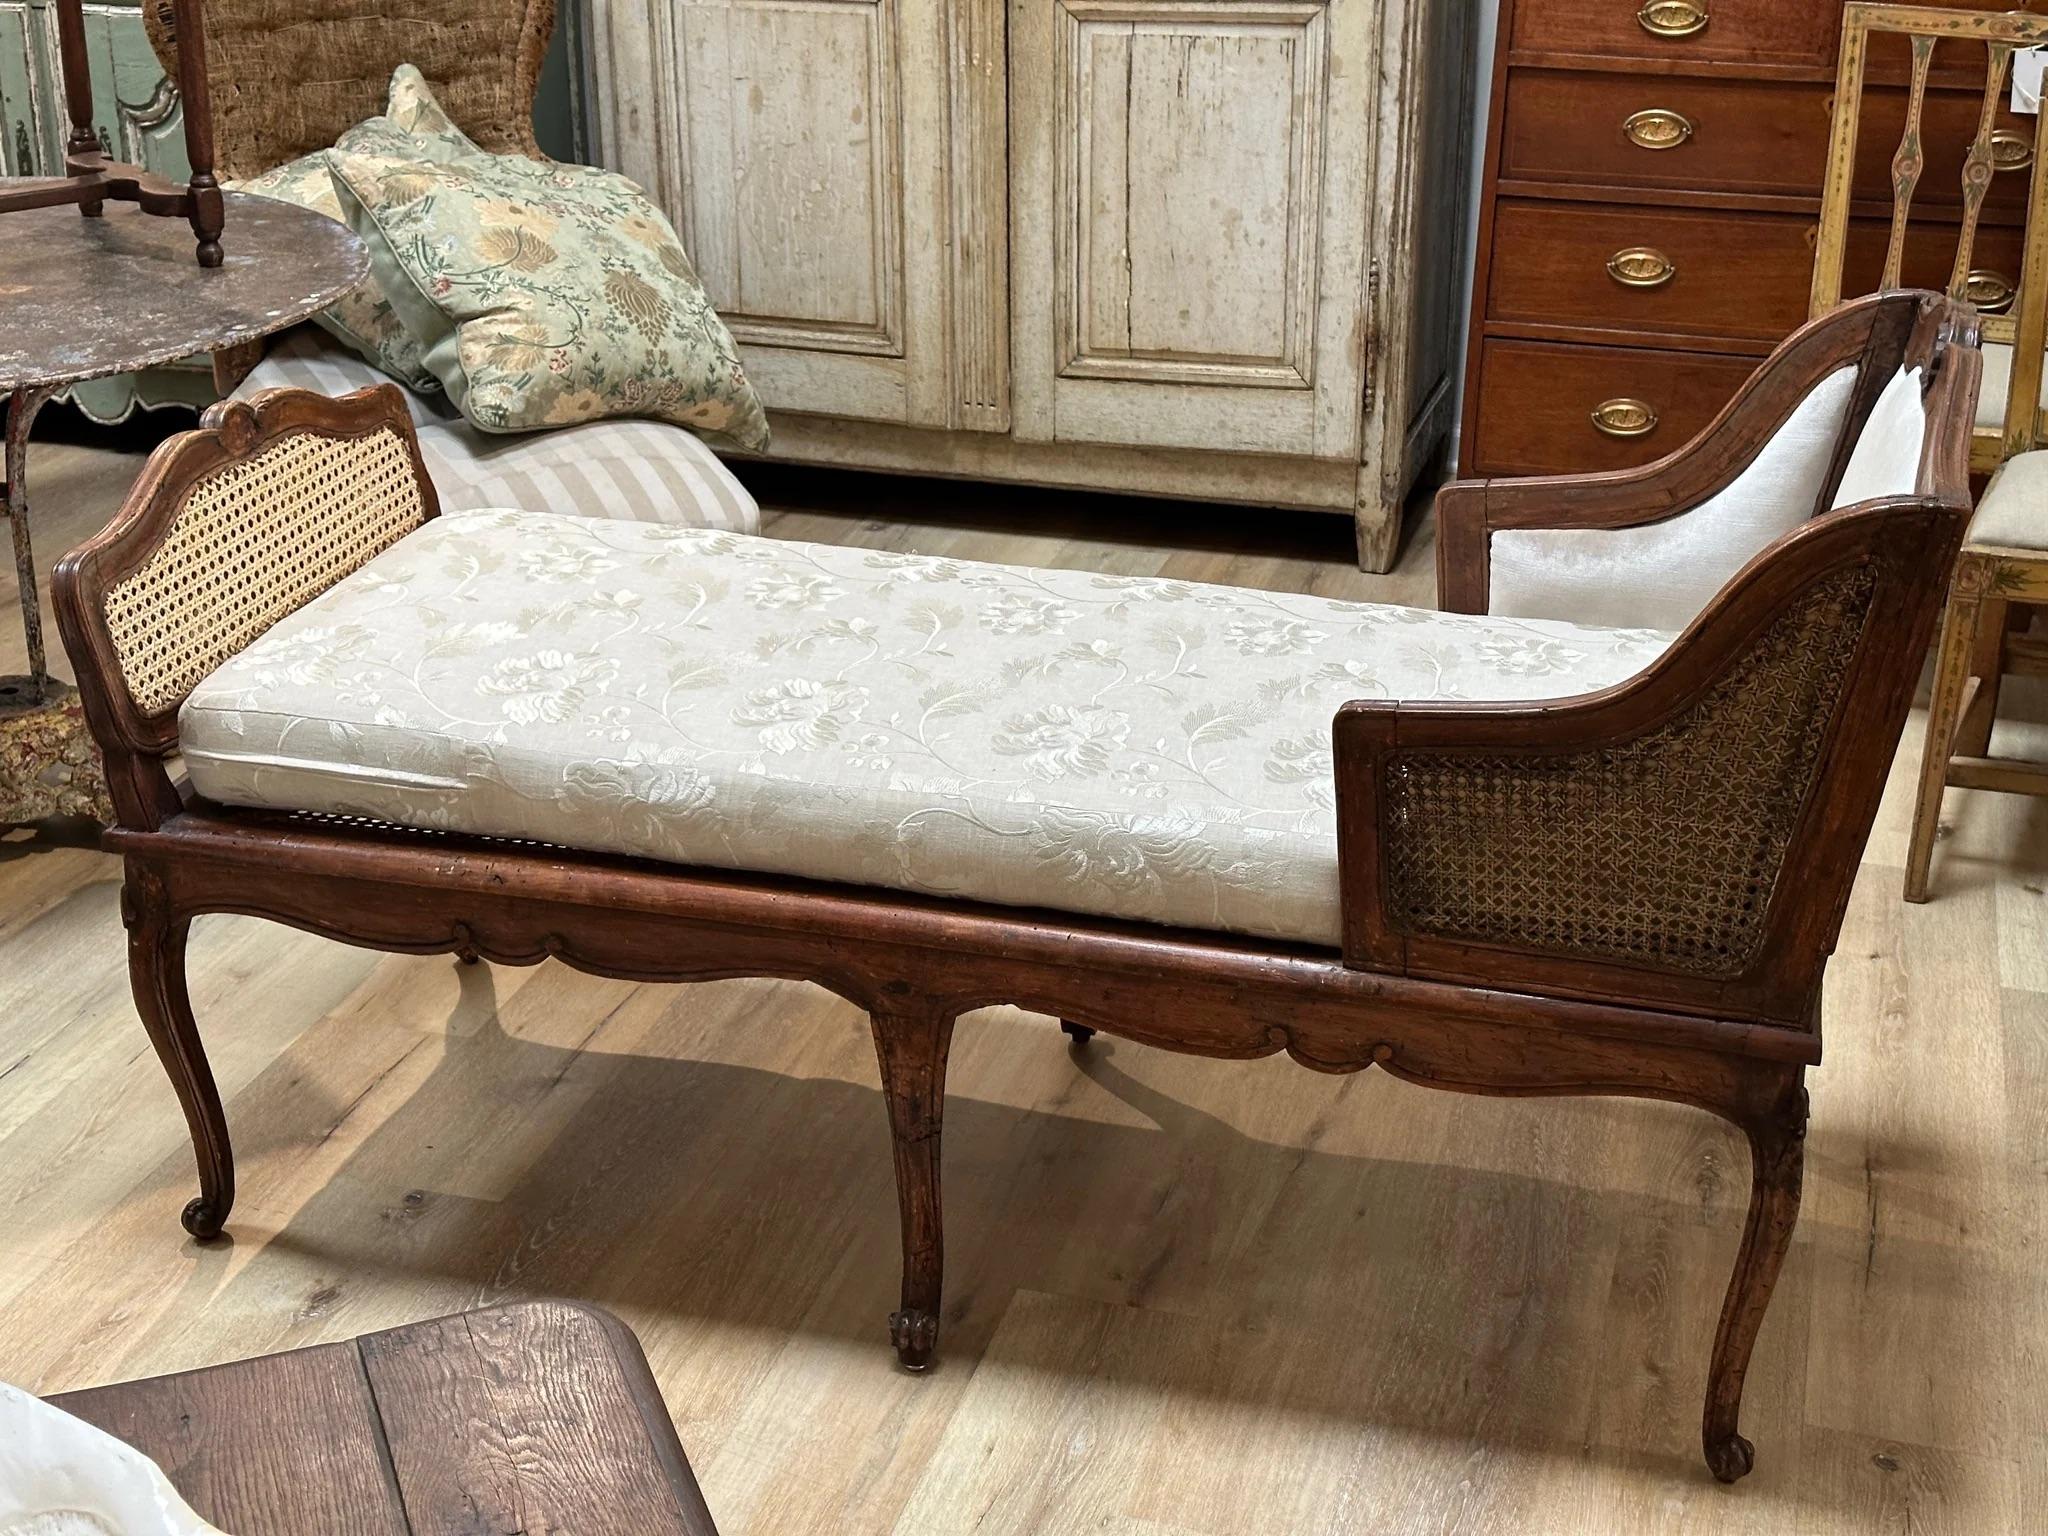 18th century Italian Lit de Repos in Walnut and Cane For Sale 1